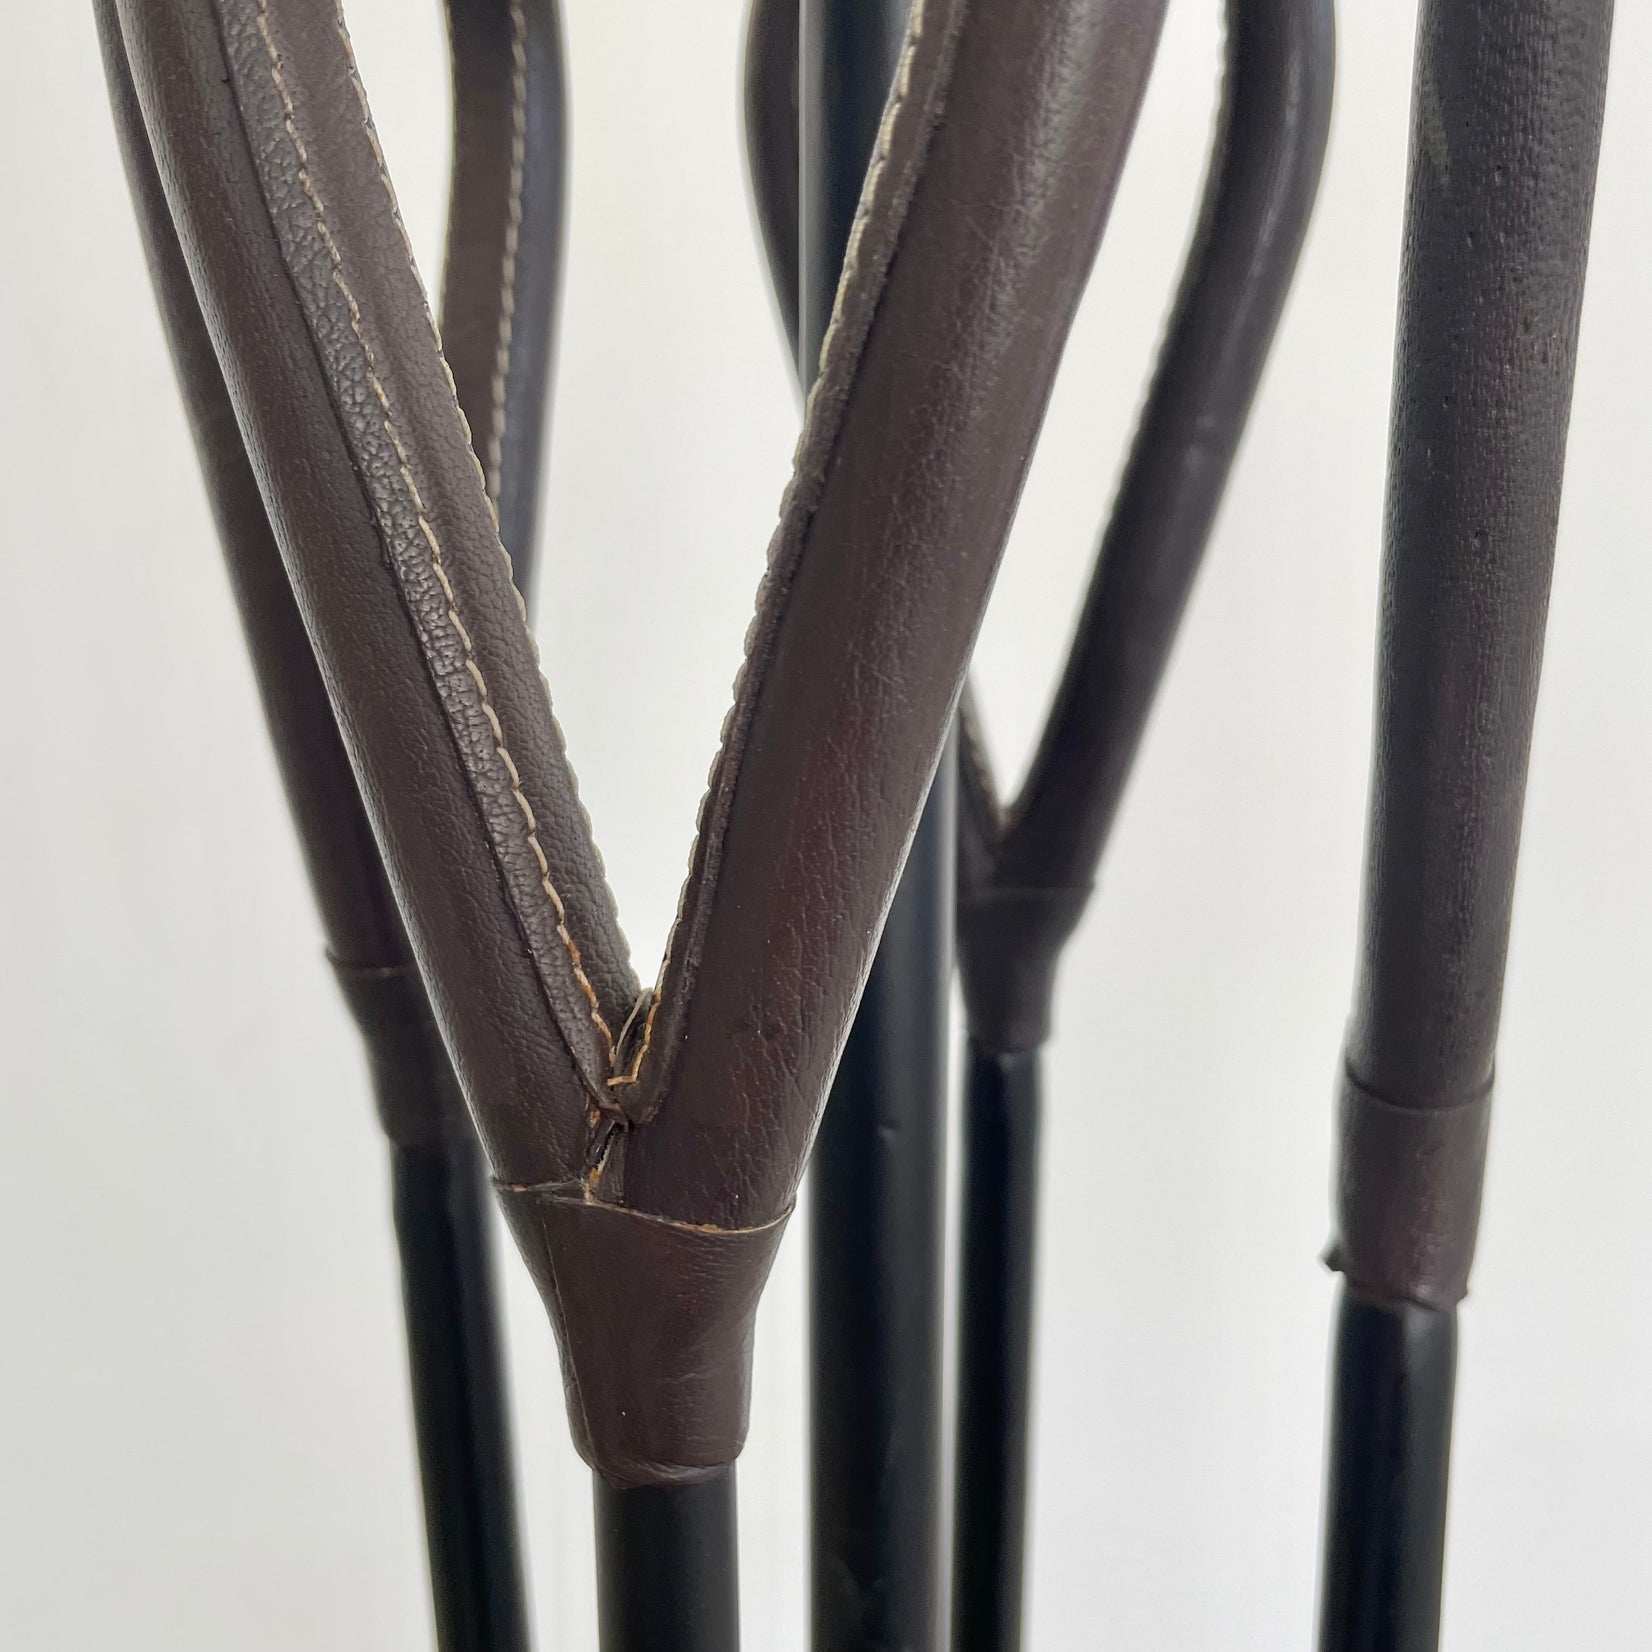 Leather and Iron Fireplace Set in the Style of Jacques Adnet, 1980s USA